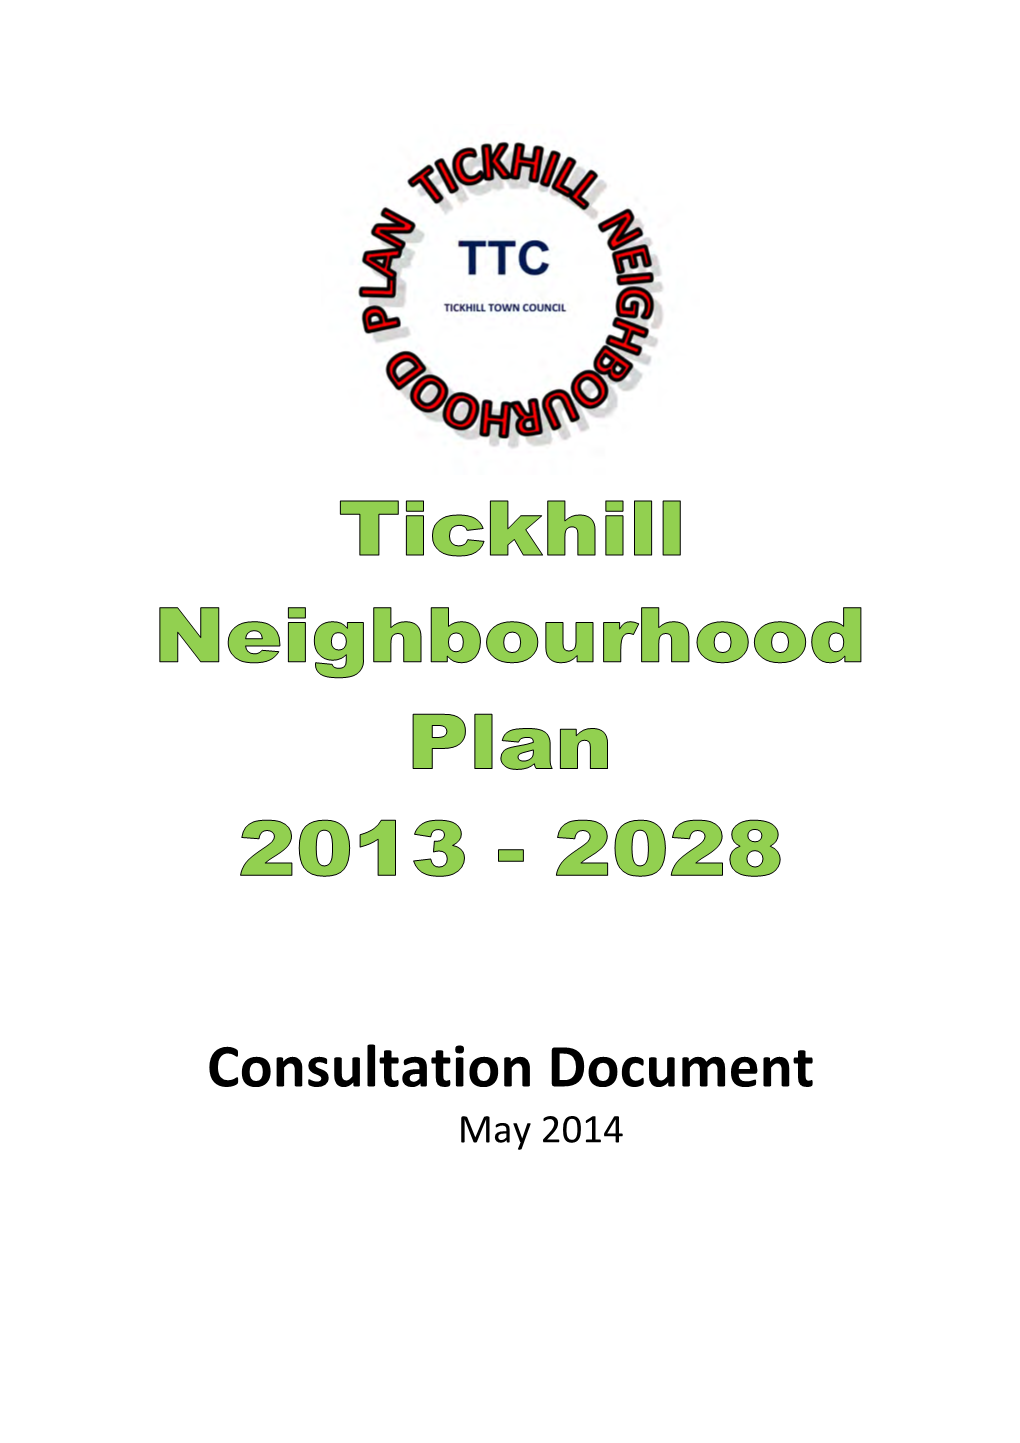 Consultation Document May 2014